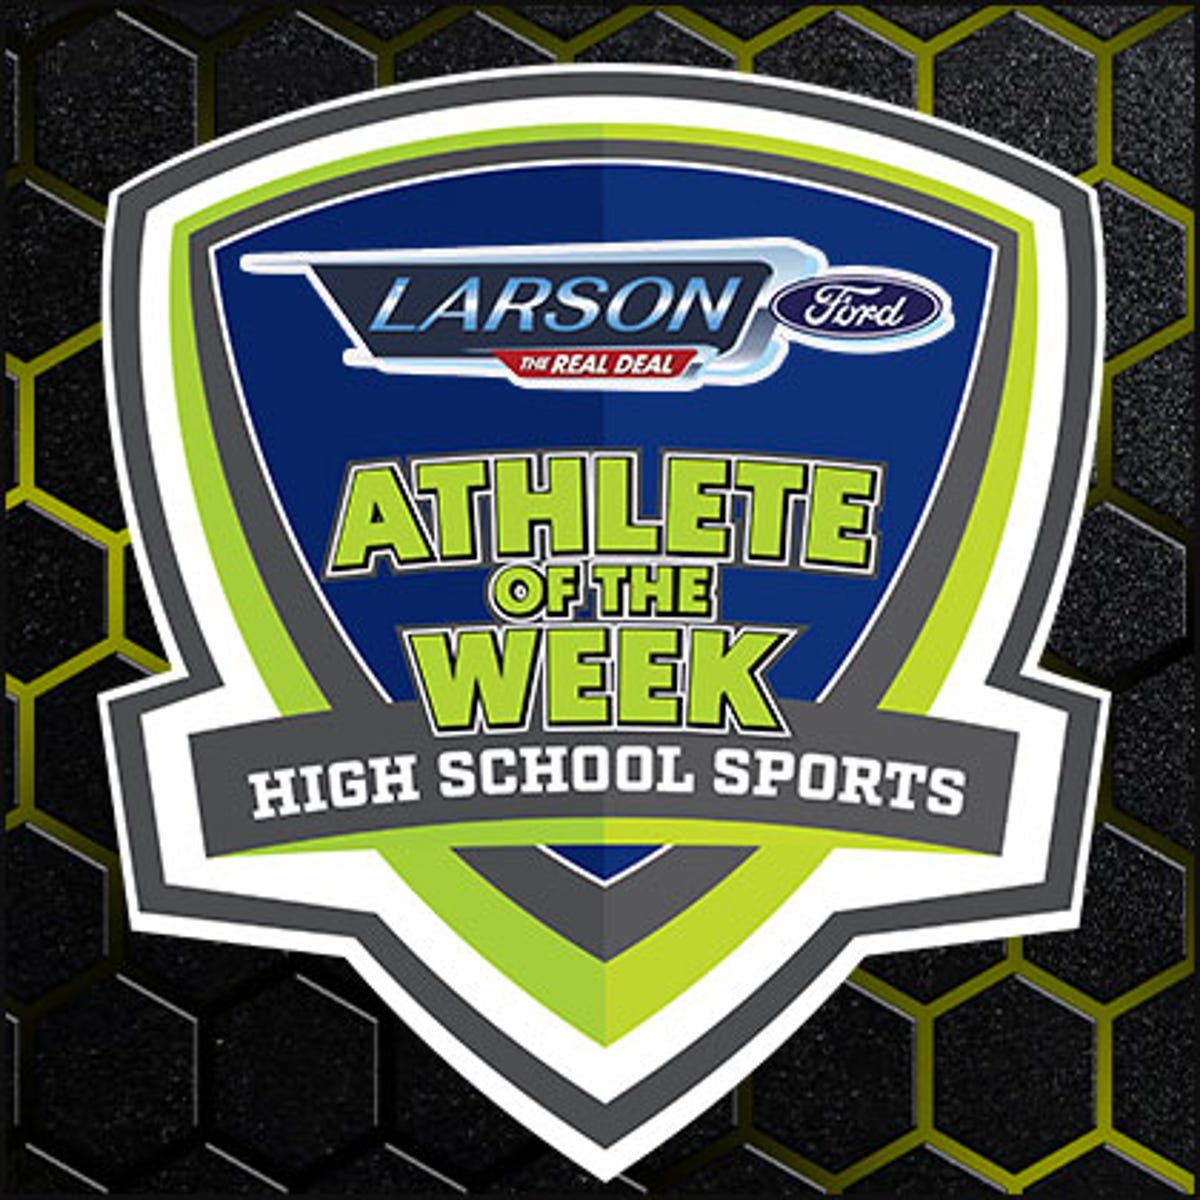 POLL: APP Athlete of the Week No. 3, sponsored by Larson Ford